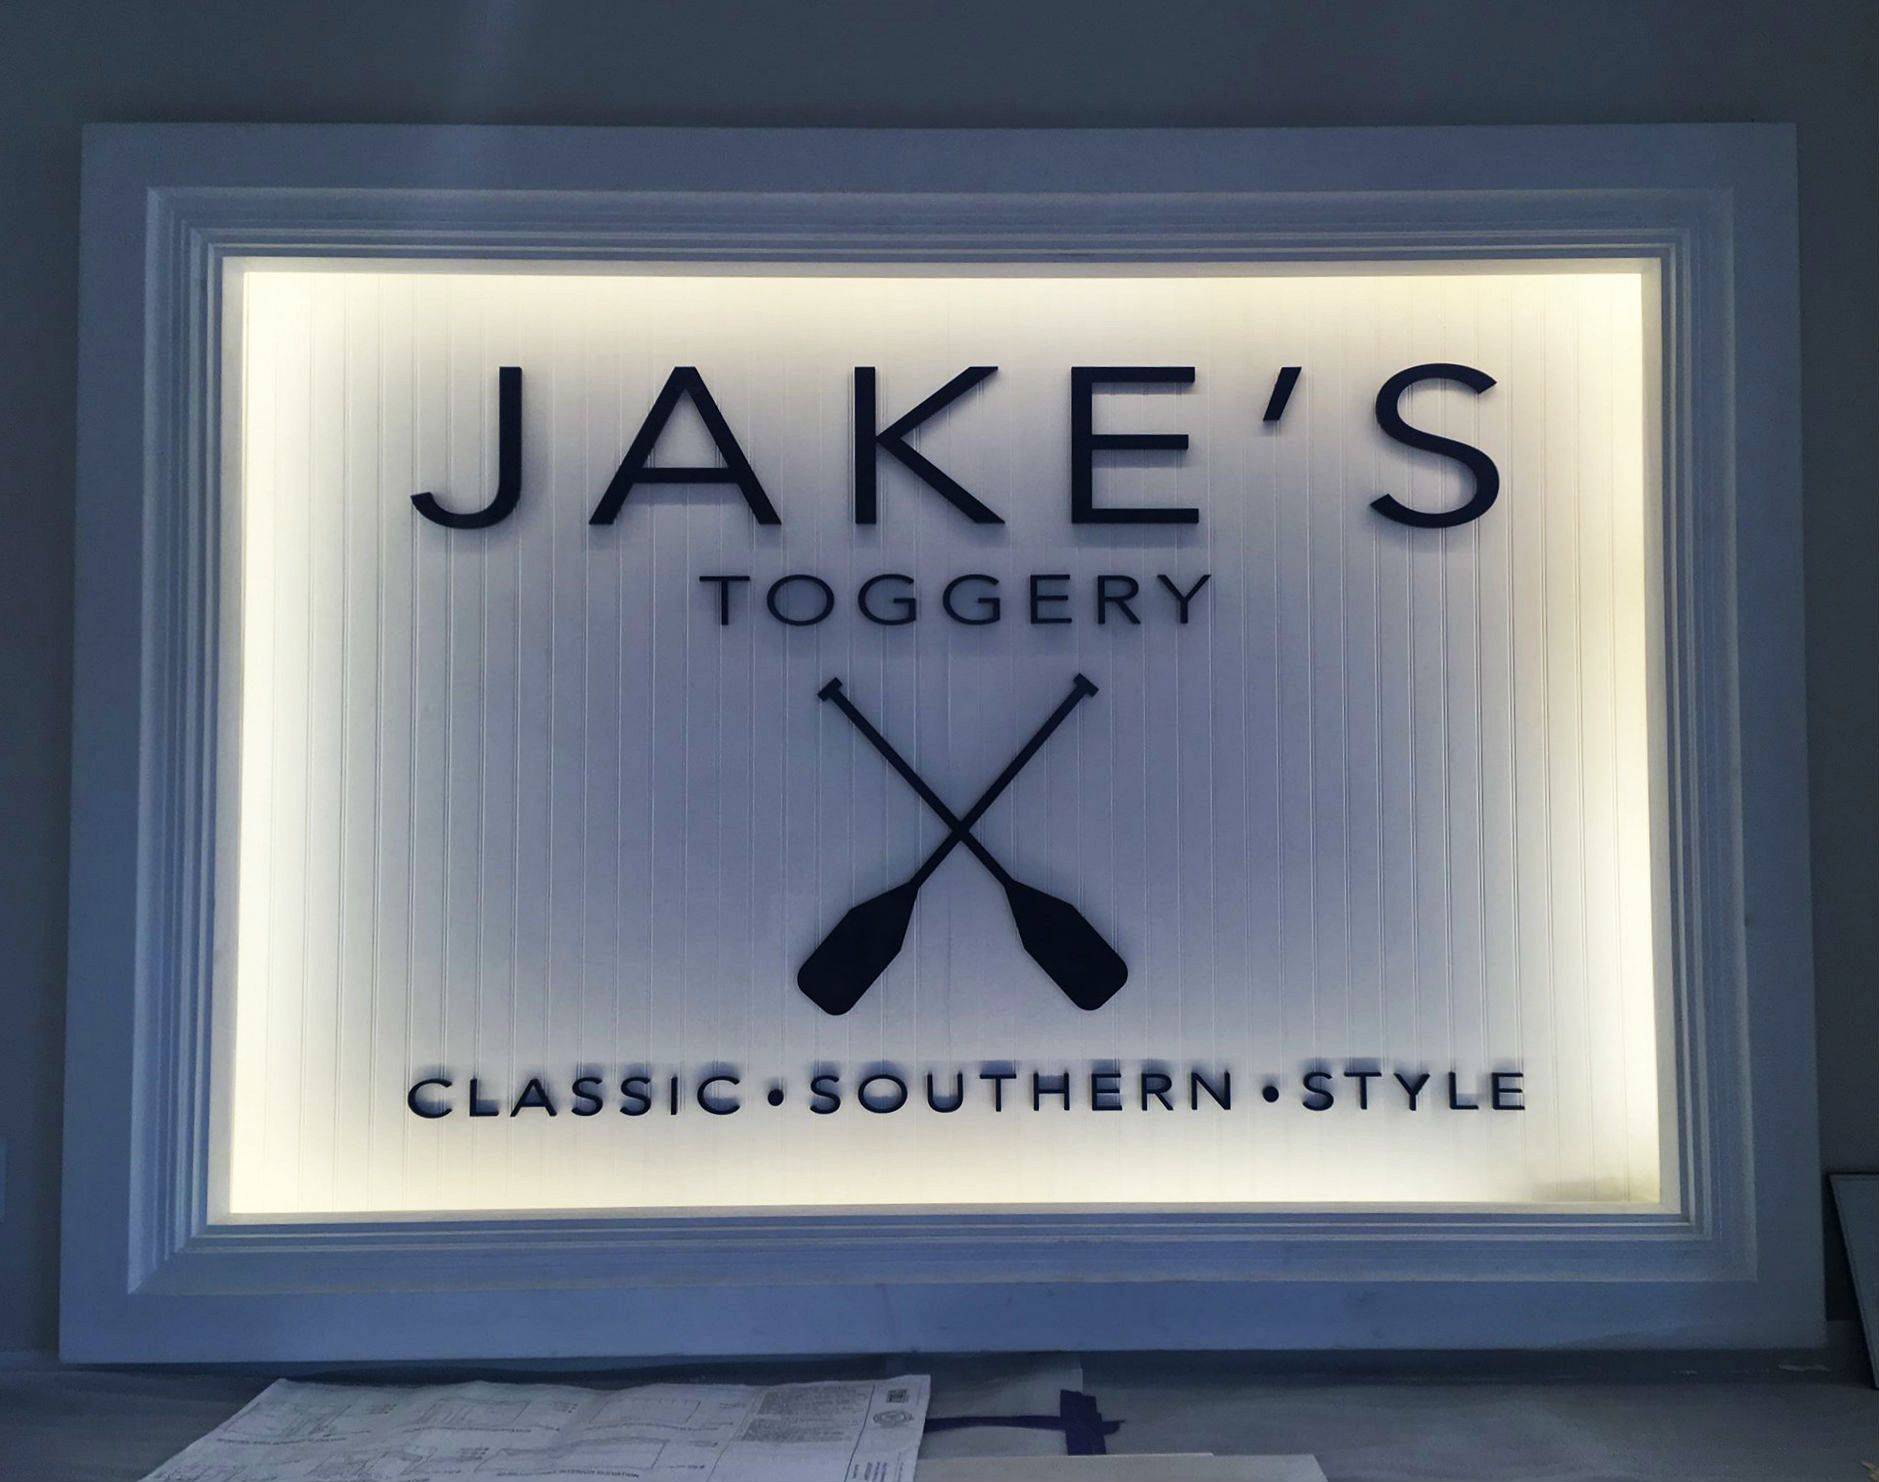 Illuminated Dimensional Sign for Jakes Toggery